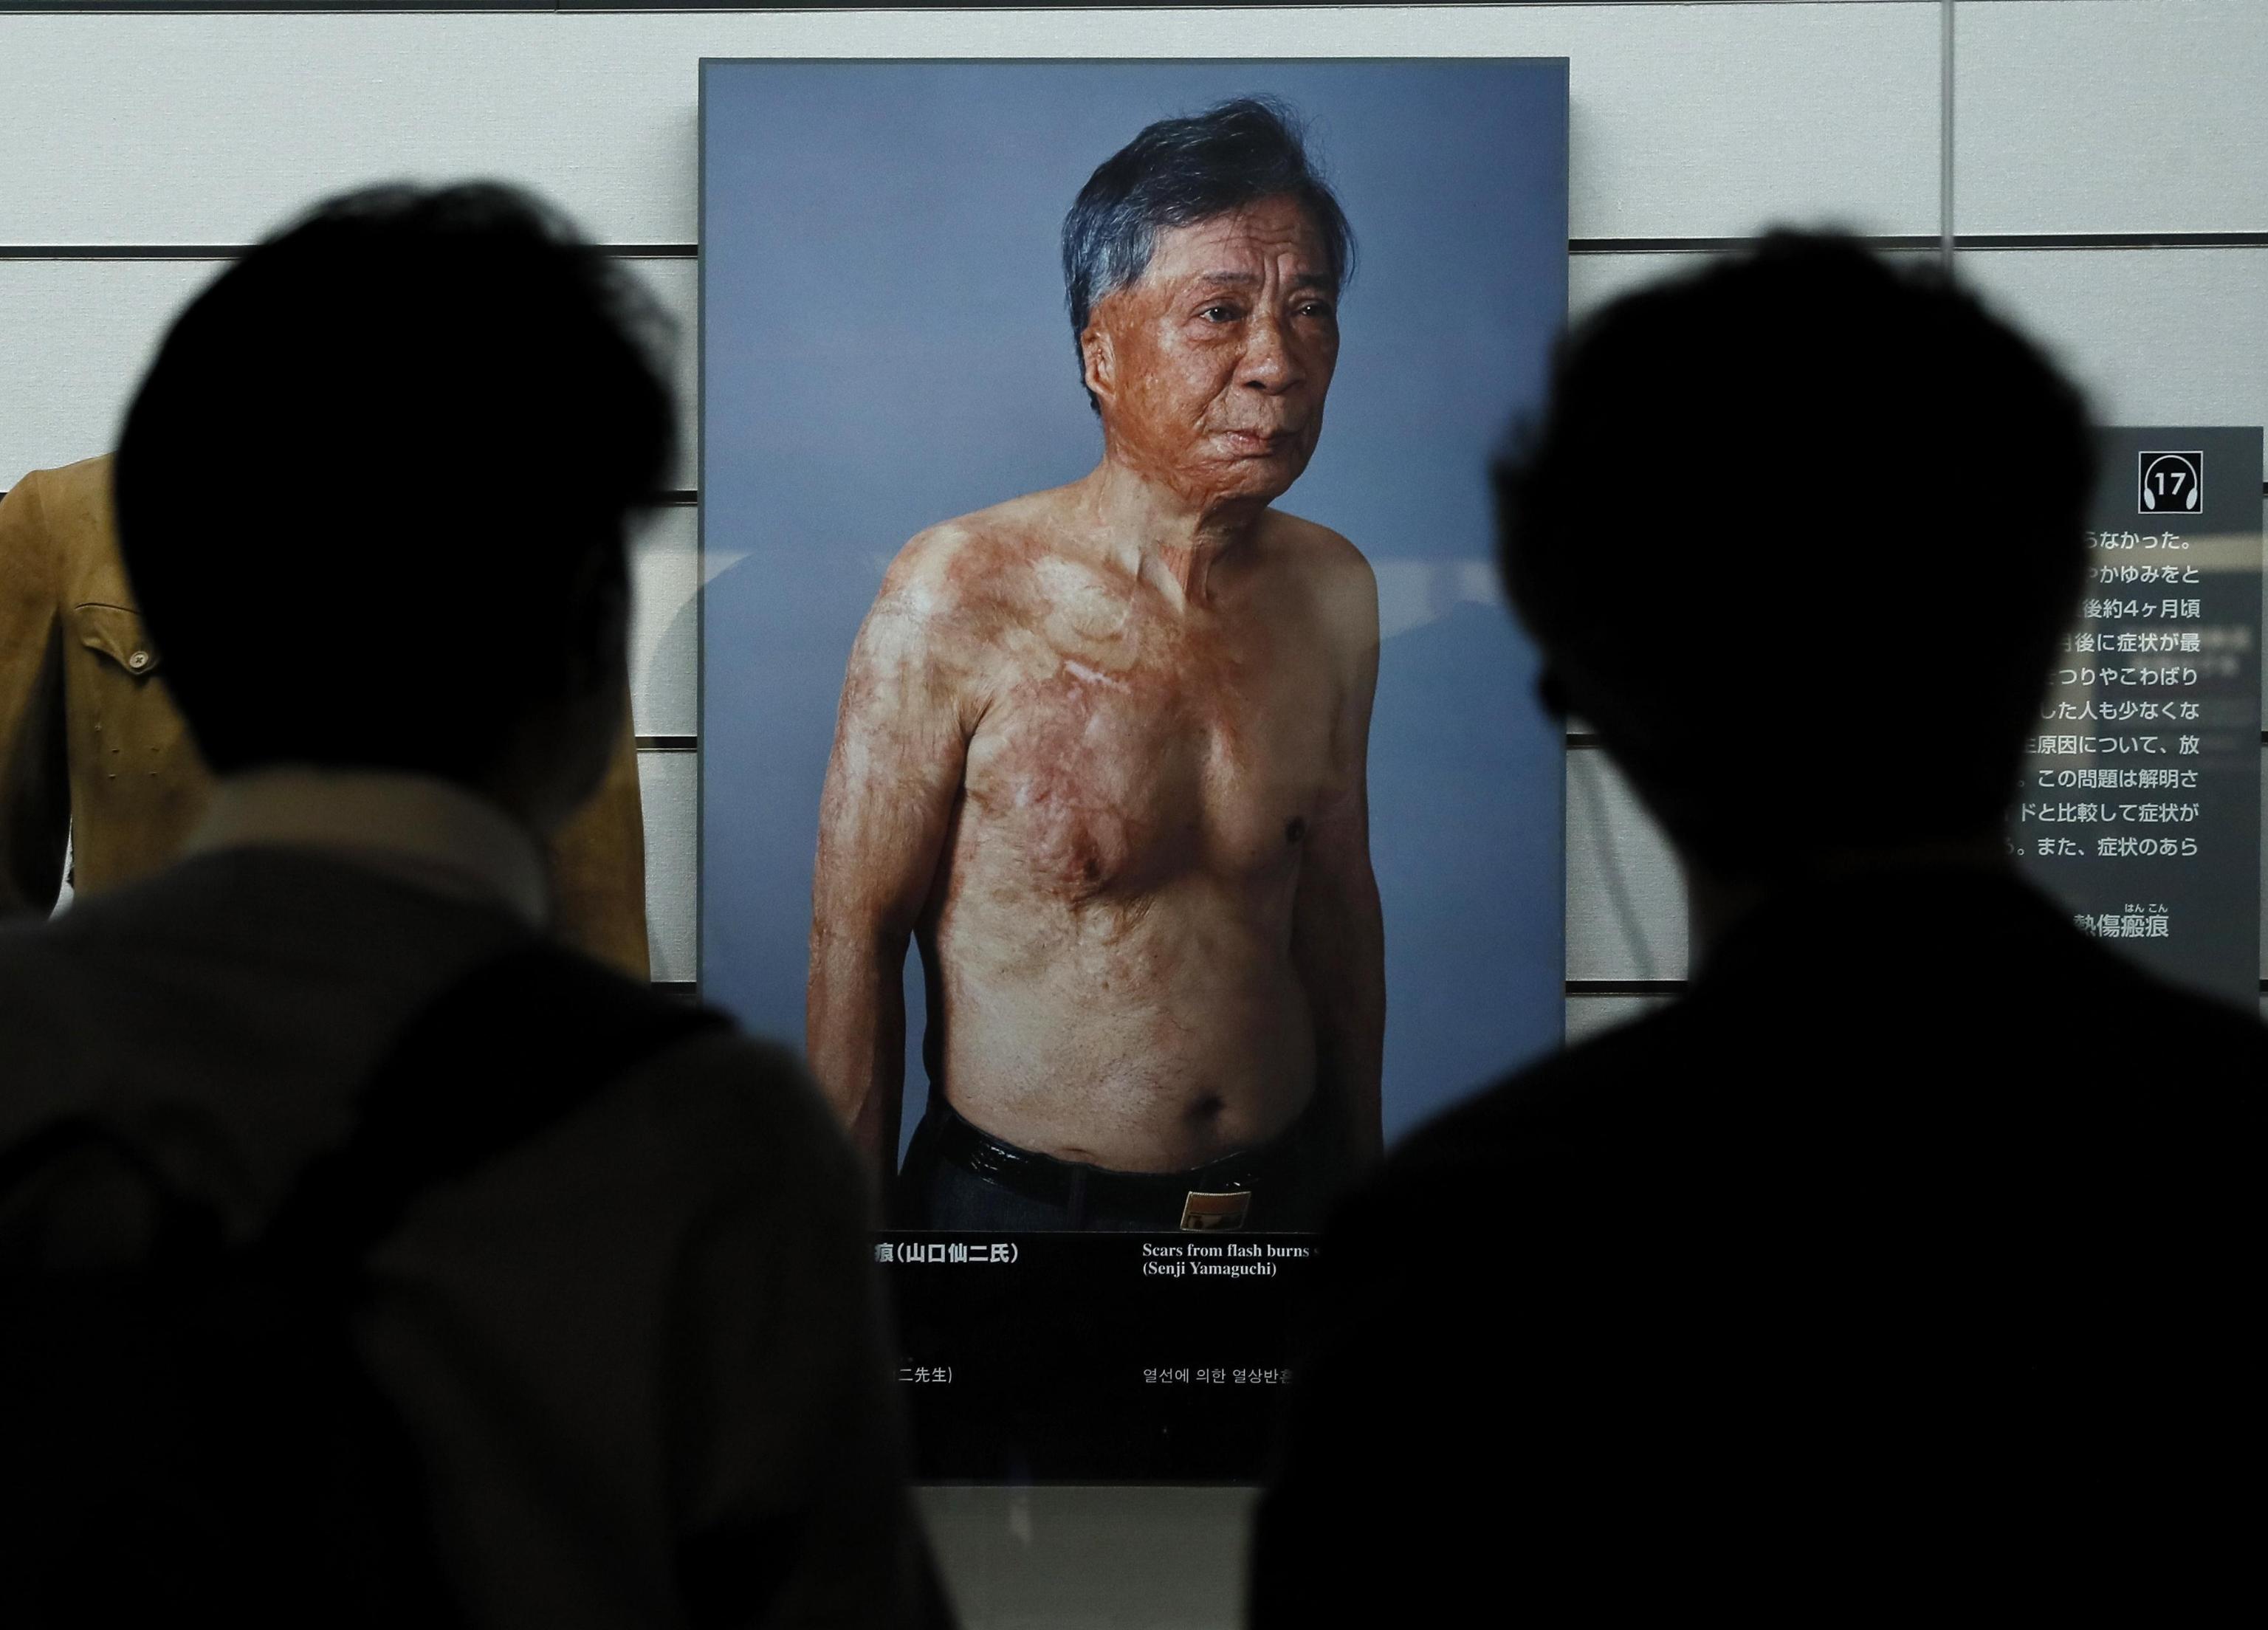 epa07839100 (FILE) - Visitors looking at a photo of Atomic Bomb survivor Senji Yamaguchi displayed at Nagasaki Atomic Bomb Museum in Nagasaki, southwestern Japan, 18 July 2019. The Vatican announced on 13 September 2019 Pope Francis will visit Japan from 23 to 26 November and the WWII atomic bombed cities of Hiroshima Nagasaki. The Pope's visit to Japan will be for the first time since John Paul II visited in 1981.  EPA/KIMIMASA MAYAMA